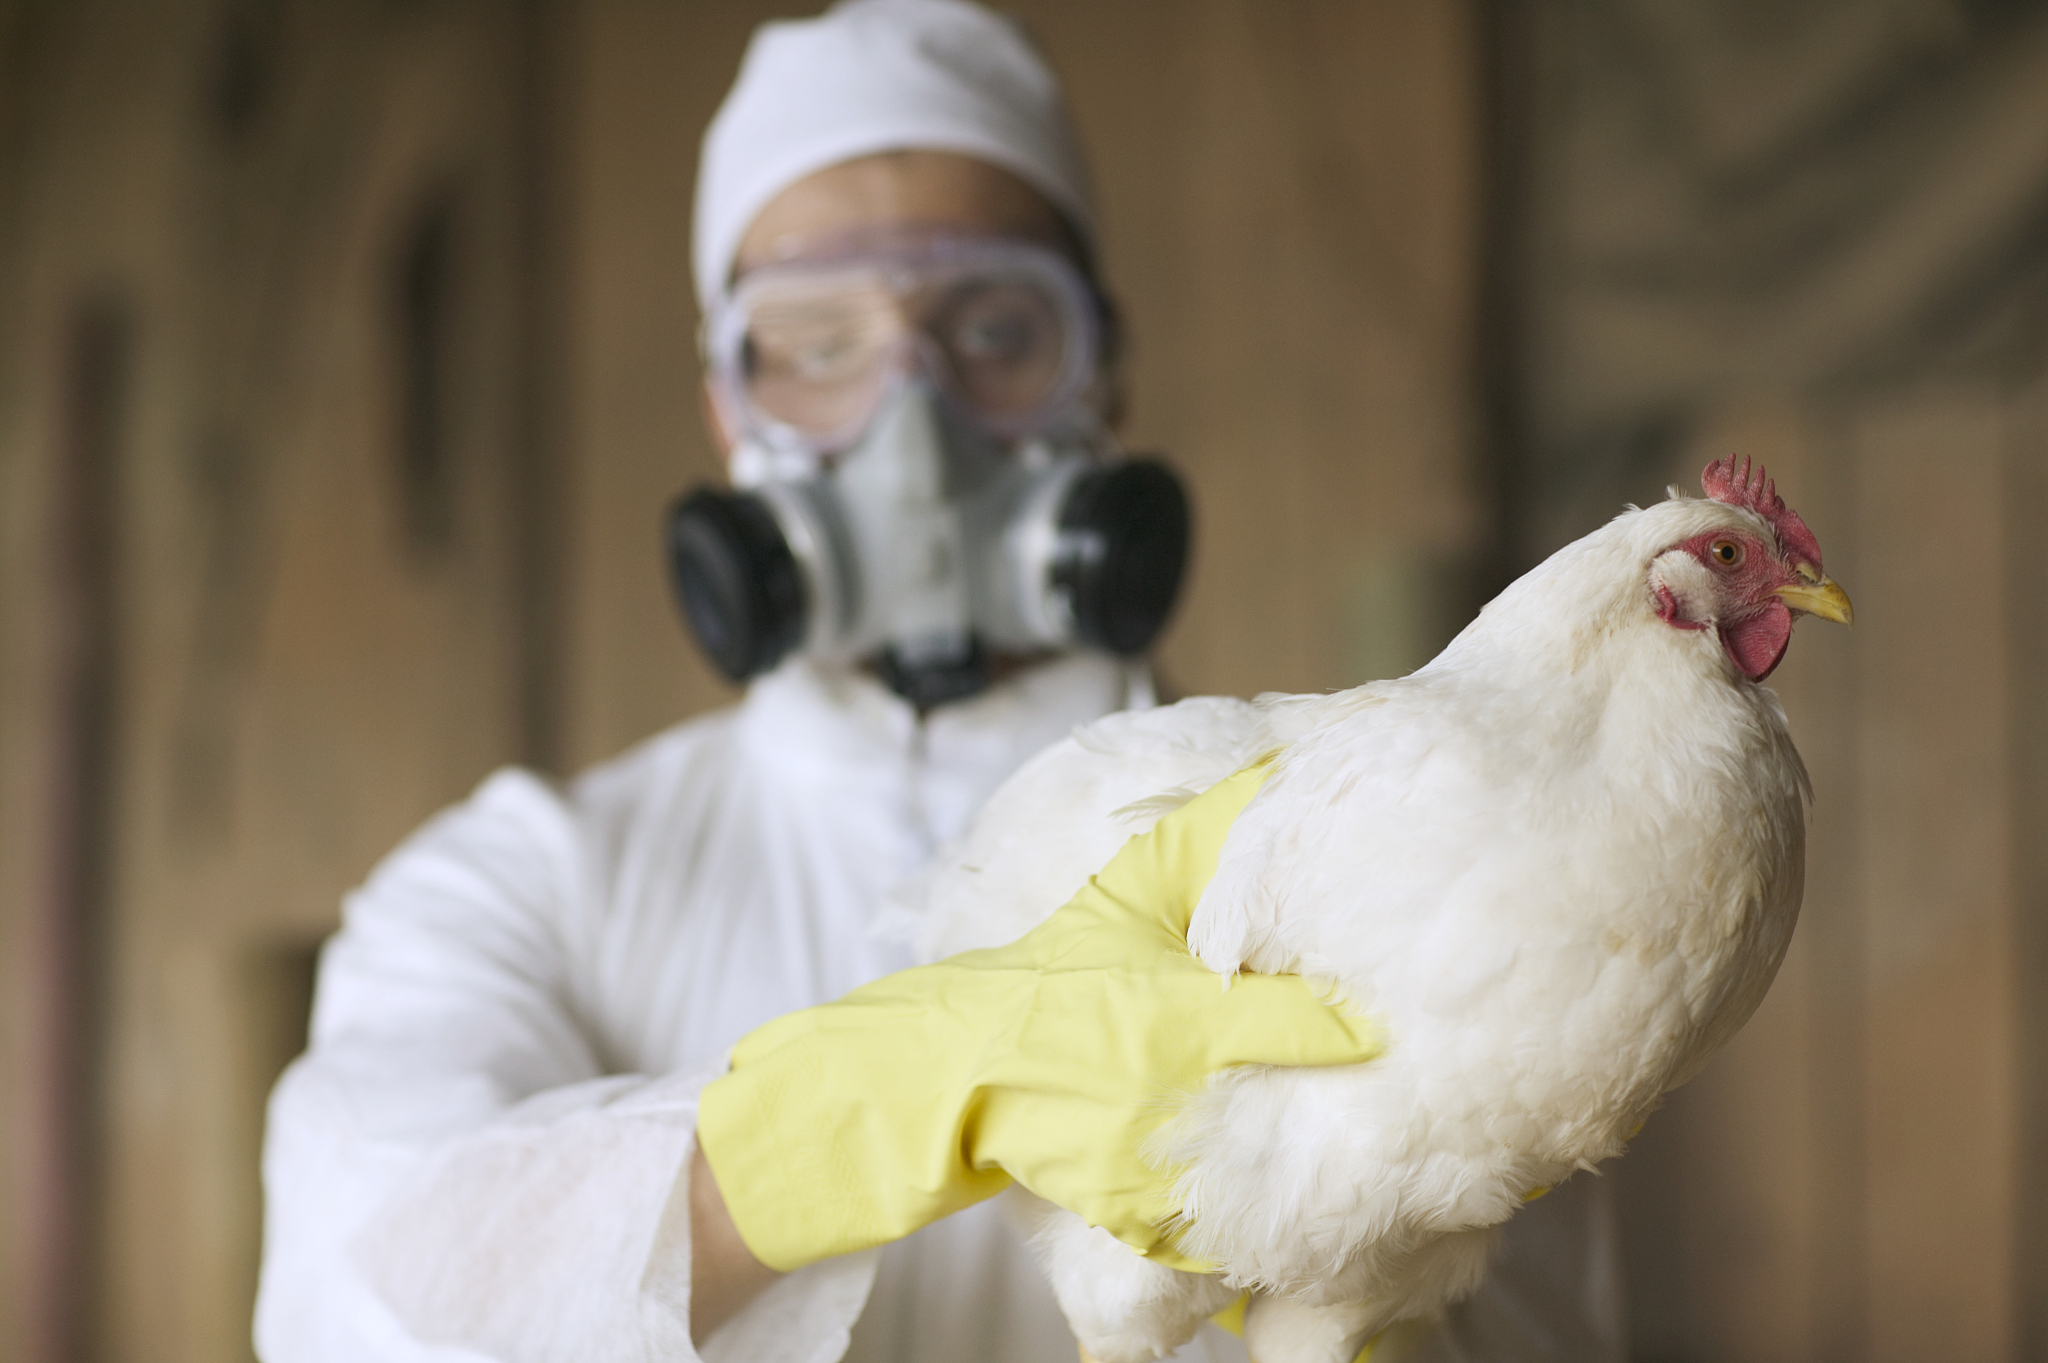 Australia is facing an unprecedented threat from three different strains of avian influenza, according to experts from the national science agency. /CFP